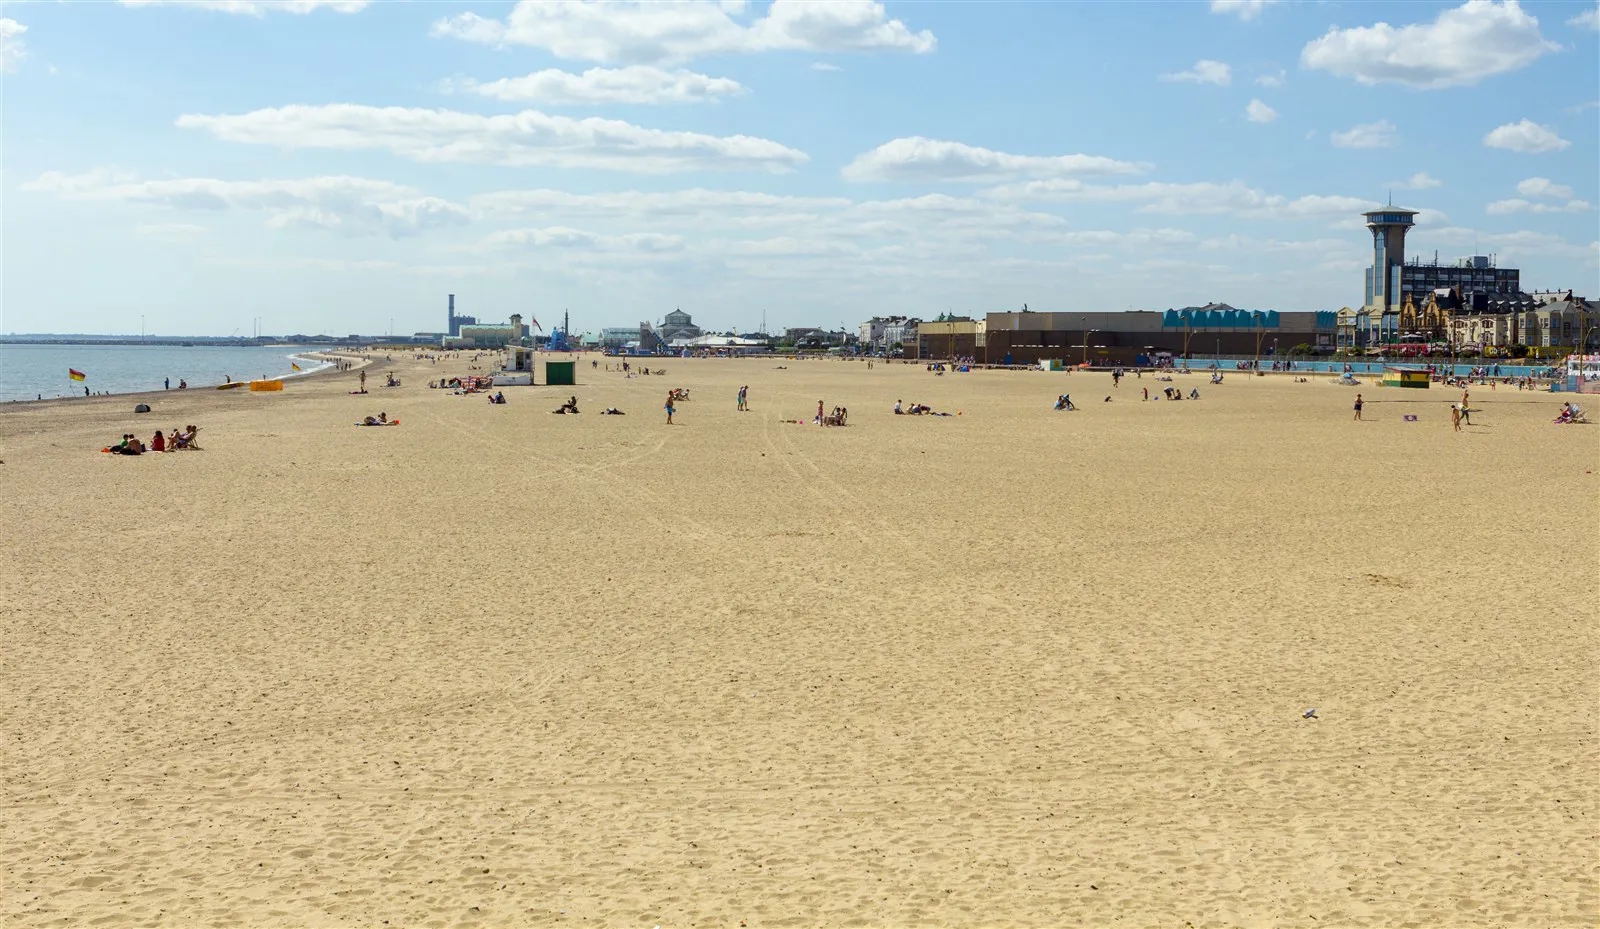 Our recommendations for what to do in Great Yarmouth